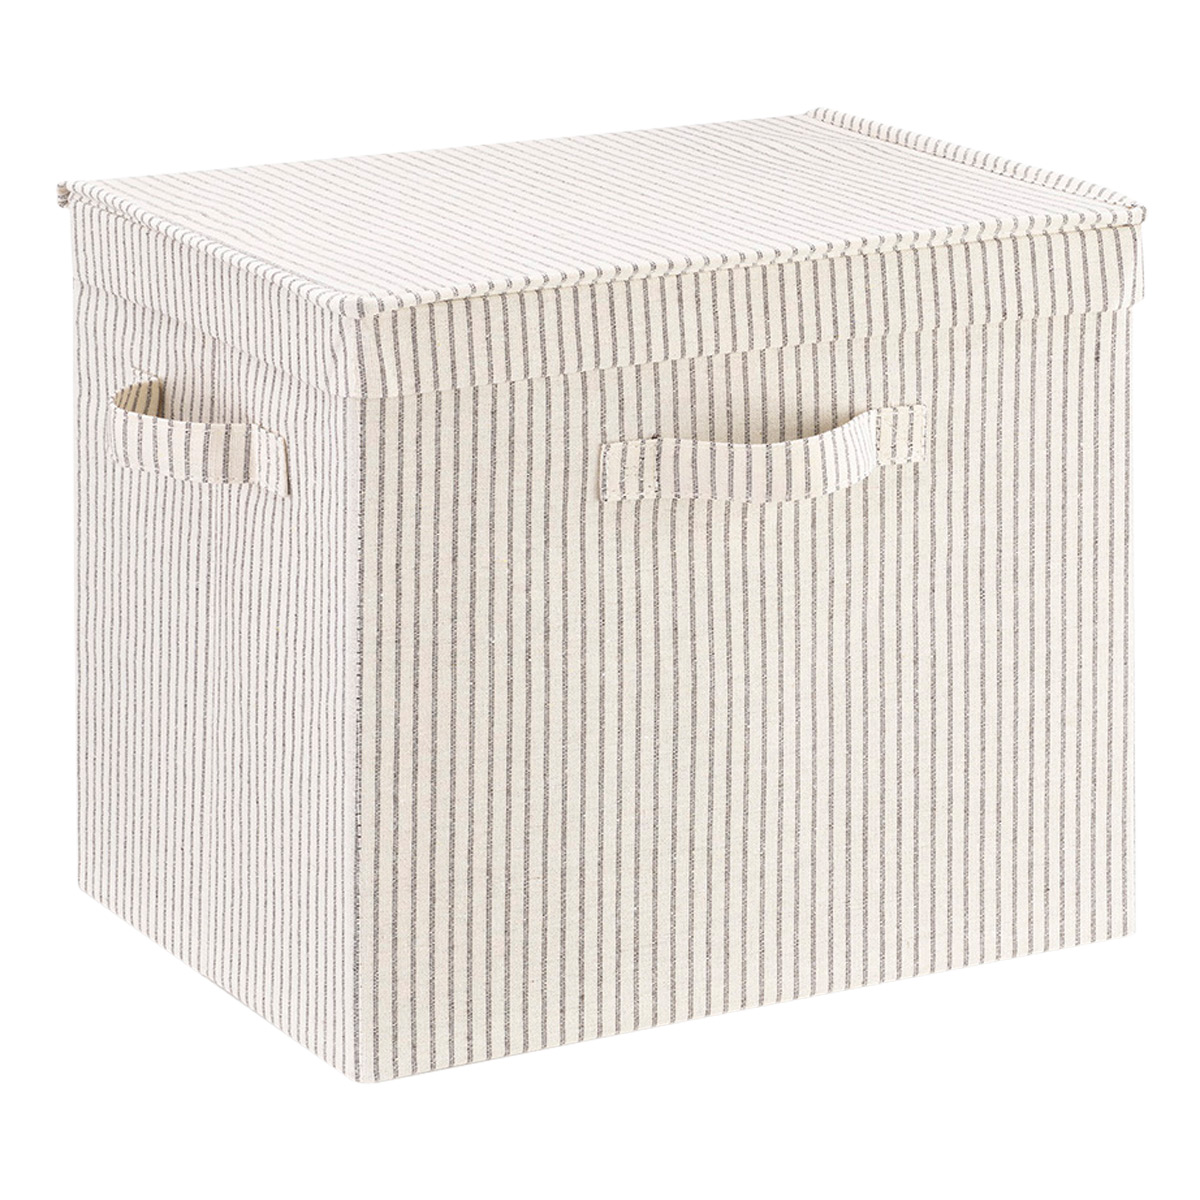 https://www.containerstore.com/catalogimages/469779/10071513-storage-cube-grey-stripe-ve.jpg